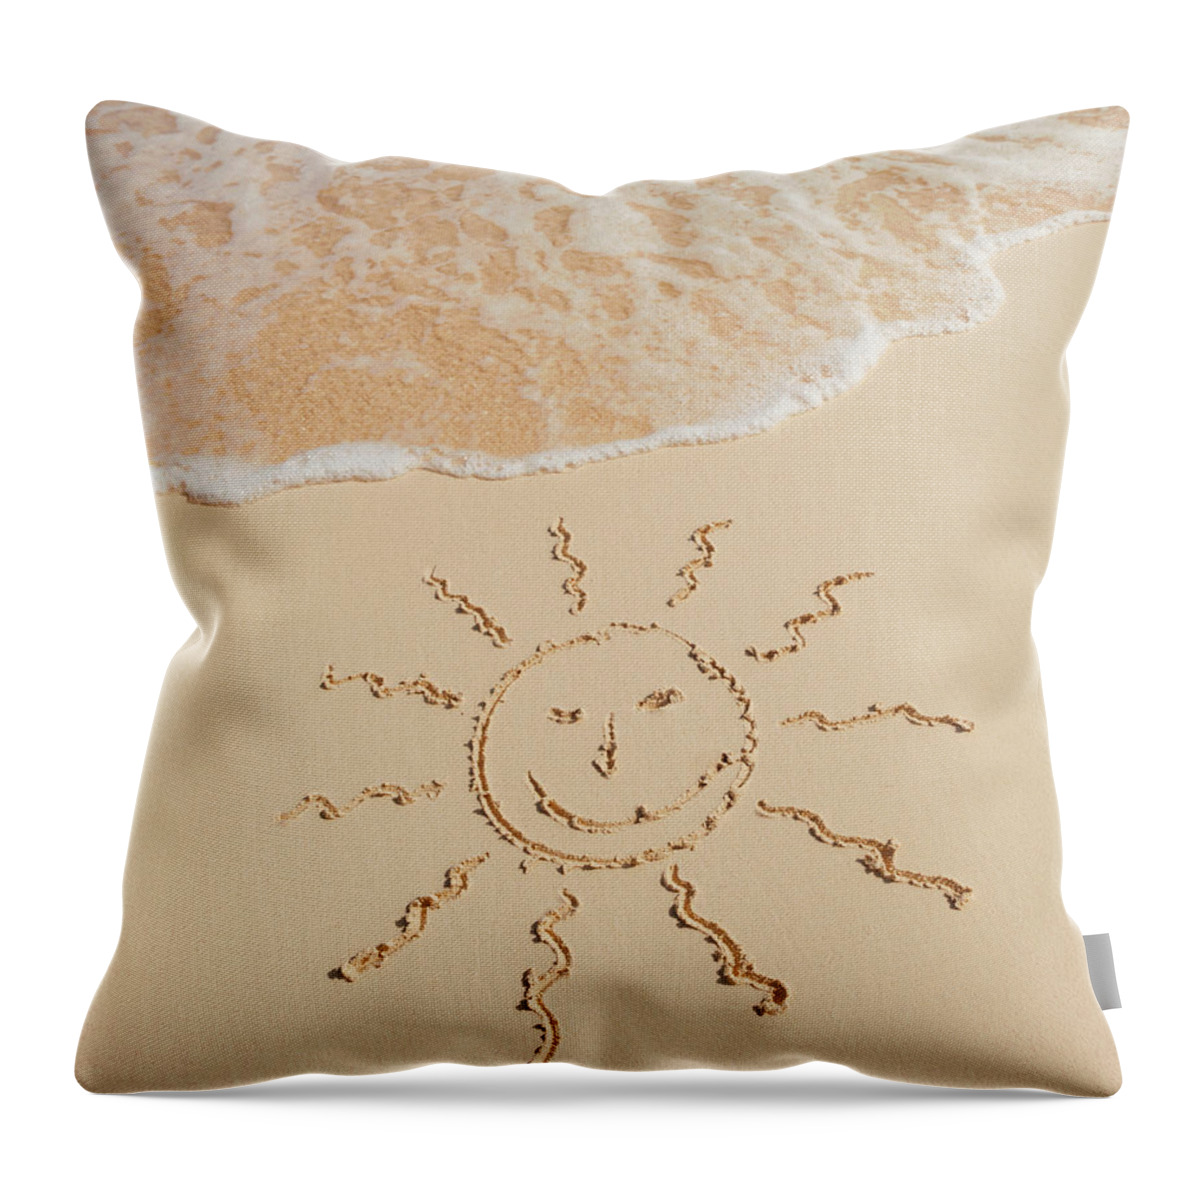 Scenics Throw Pillow featuring the photograph Mexico, Yucatan, Sun Drawing On Beach by Tetra Images